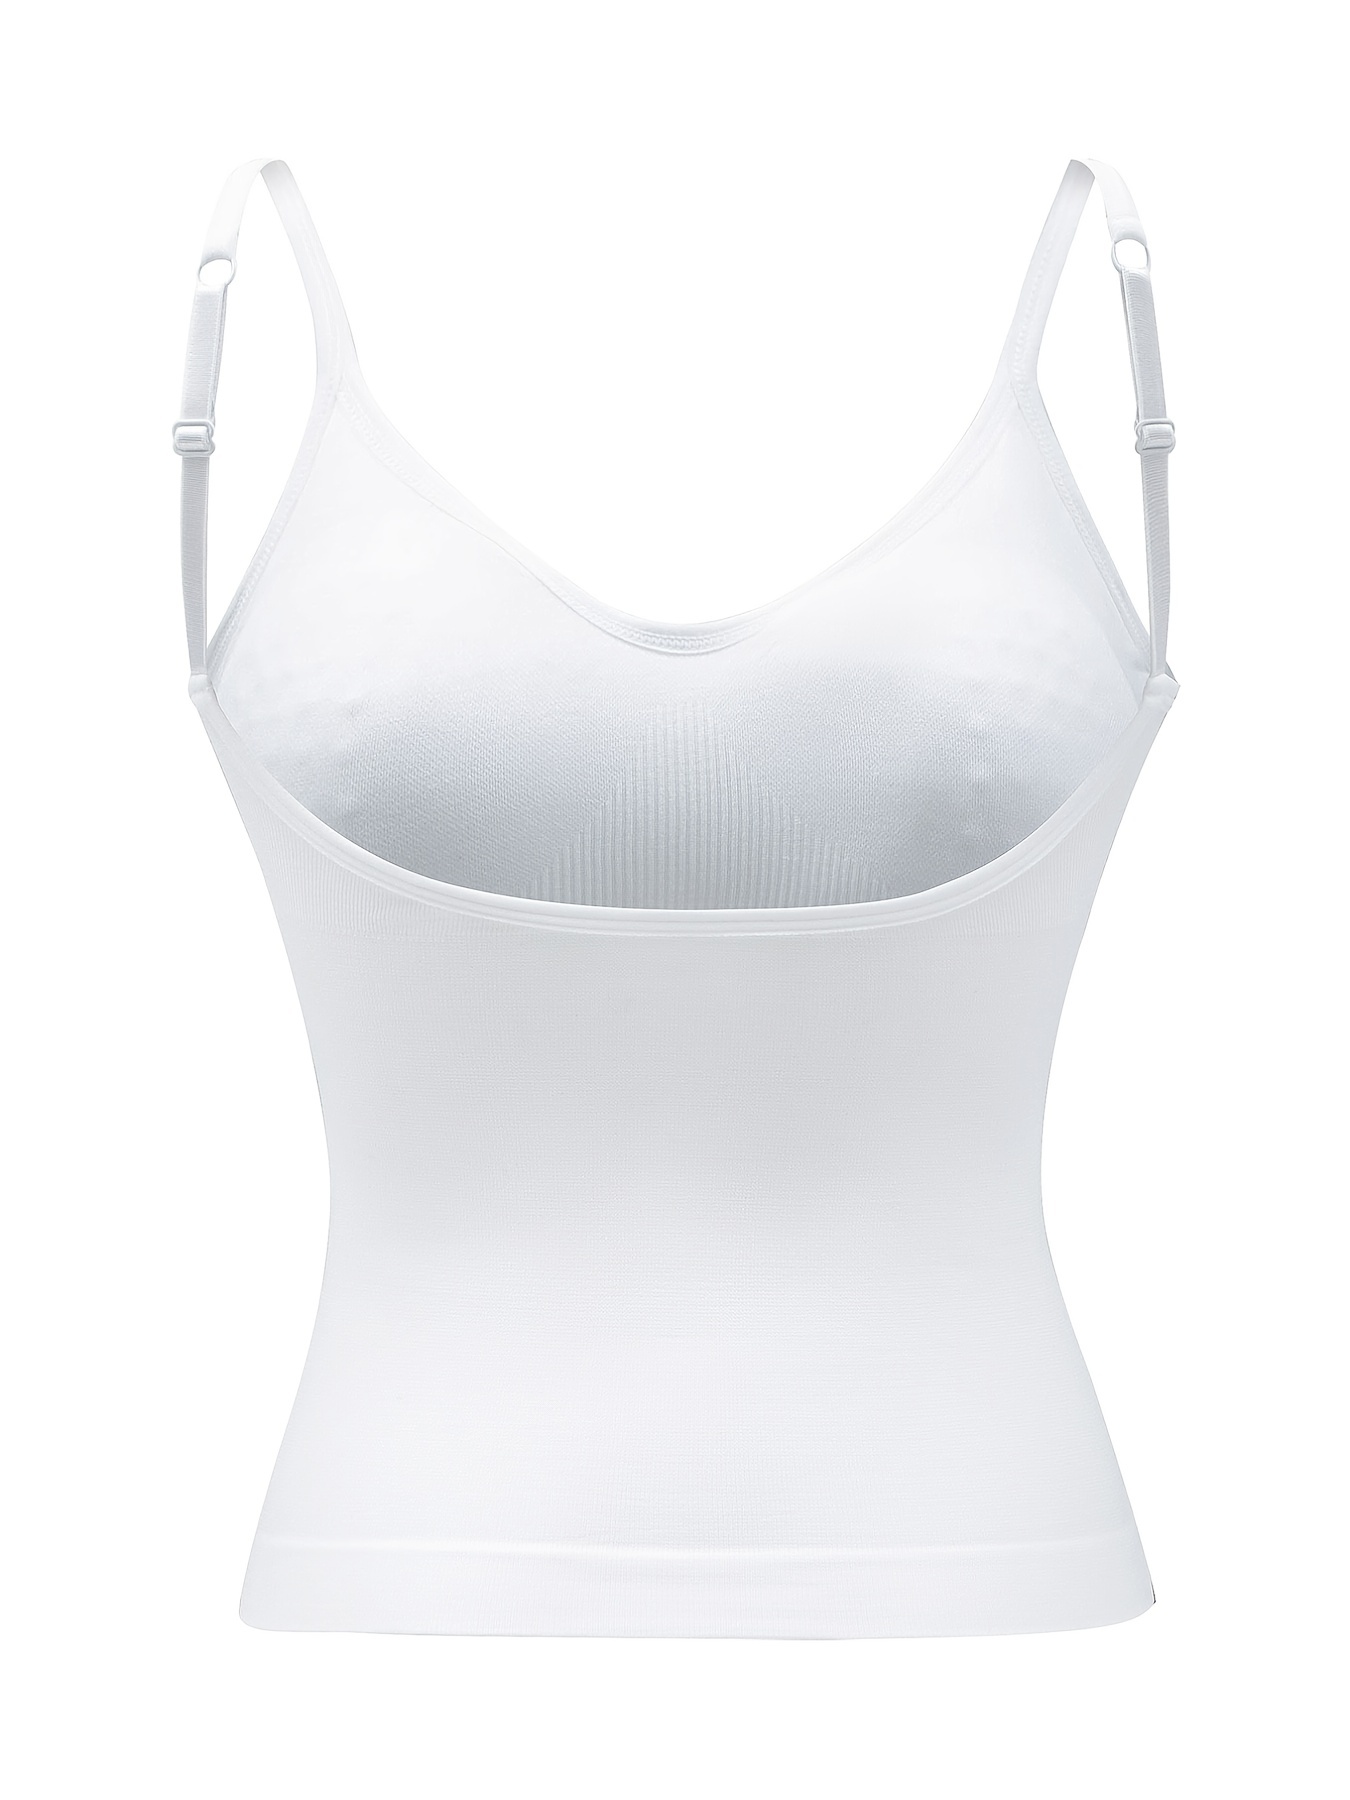 Fashion (white)Women Padded Soft Casual Bra Tank Top Women's Spaghetti Cami  Top Vest Female Camisole With Built In Bra Summer Breathable Tops WEF @ Best  Price Online